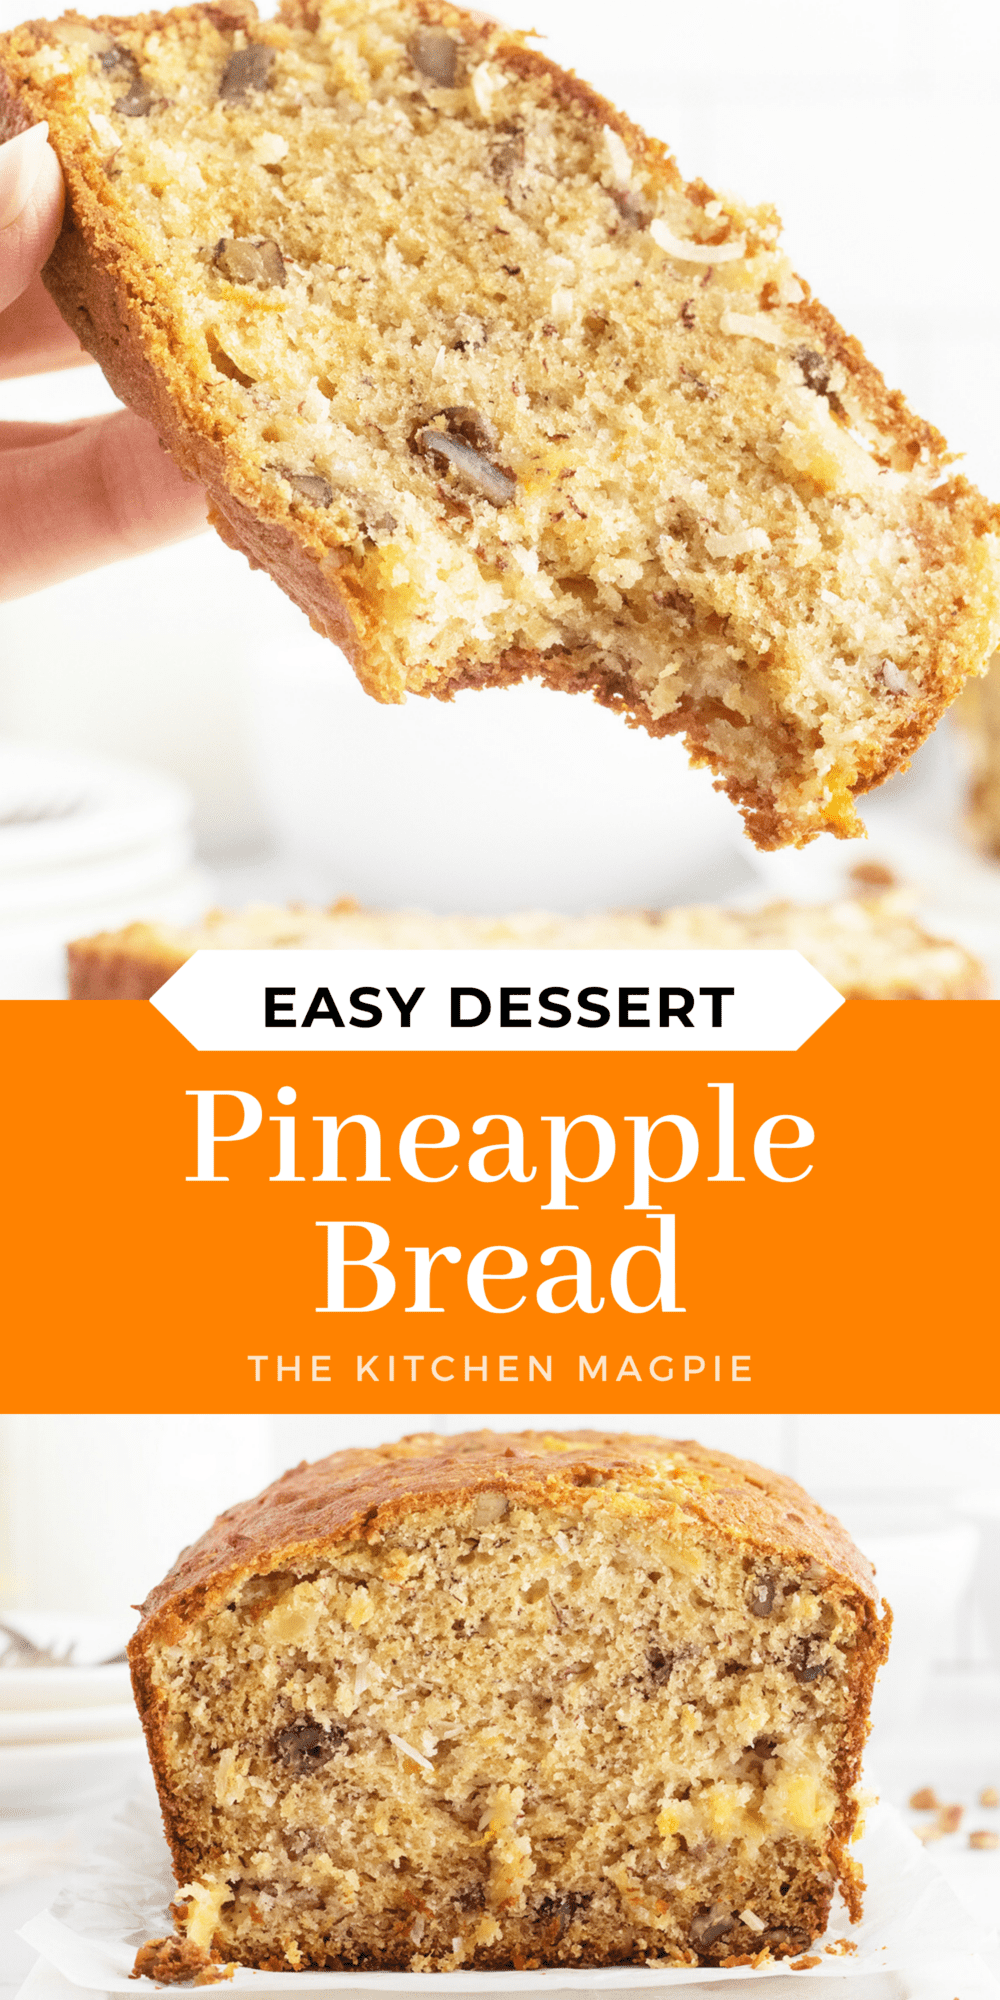 The perfect way to use up some overripe pineapple, this recipe for pineapple bread makes a quick snack or light breakfast. Just like other quick bread recipes, this pineapple bread is fast and easy to make and super delicious for very little effort.